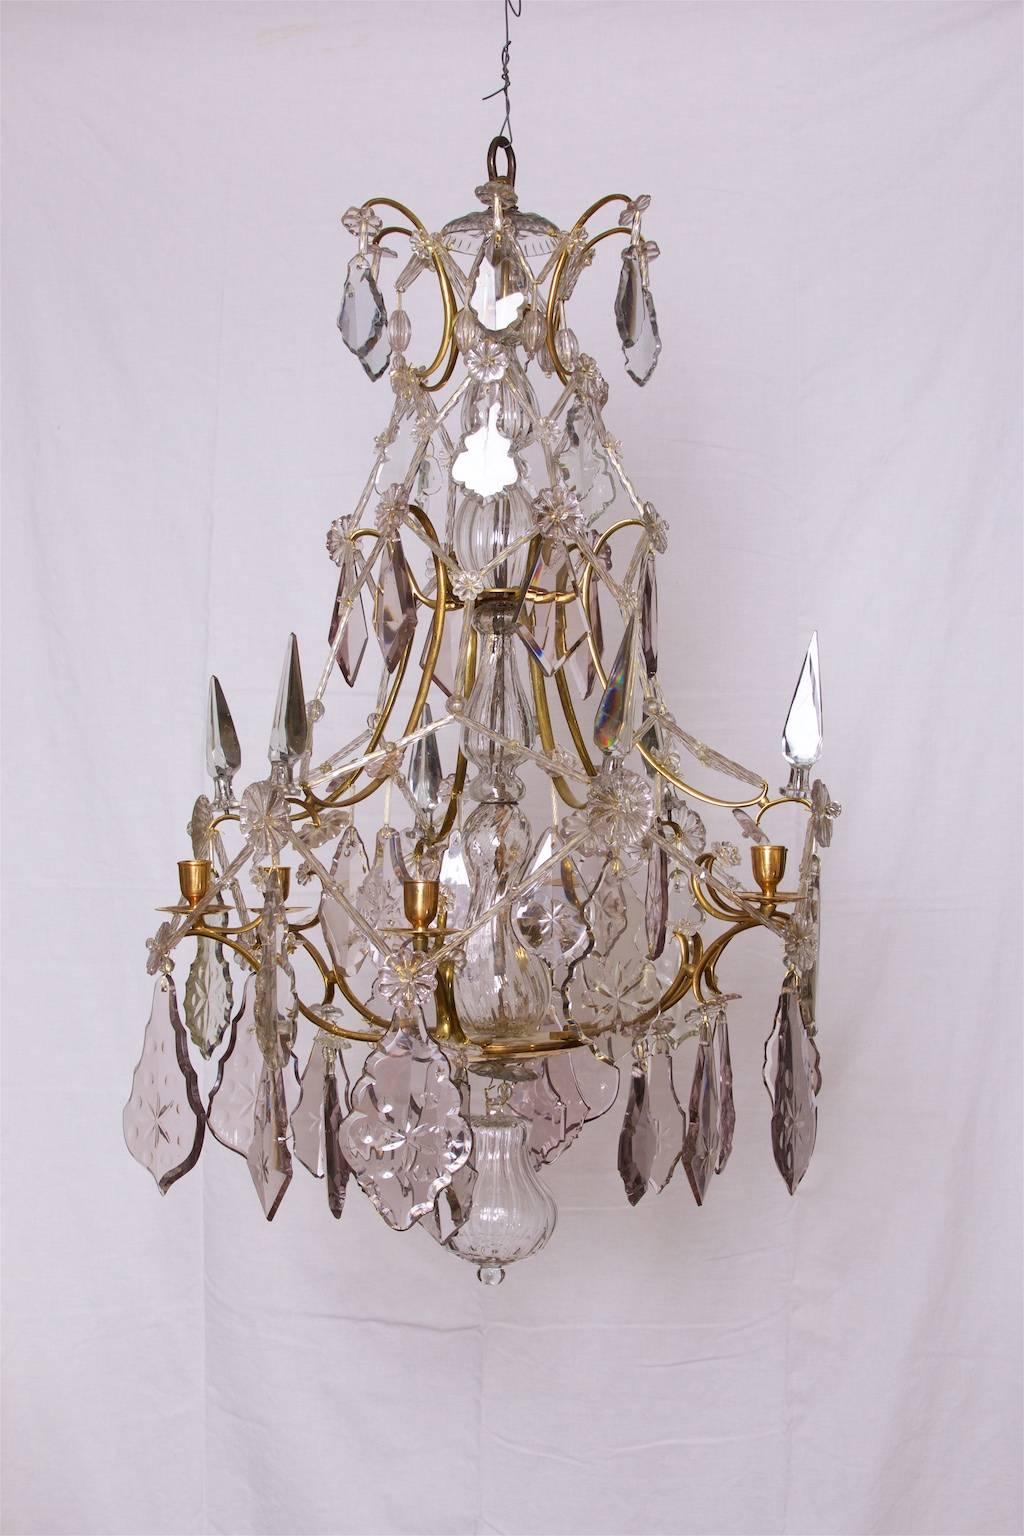 A very beautiful Swedish Crystal chandelier made for six candles, Made circa 1770, Rococo, probably in Stockholm.